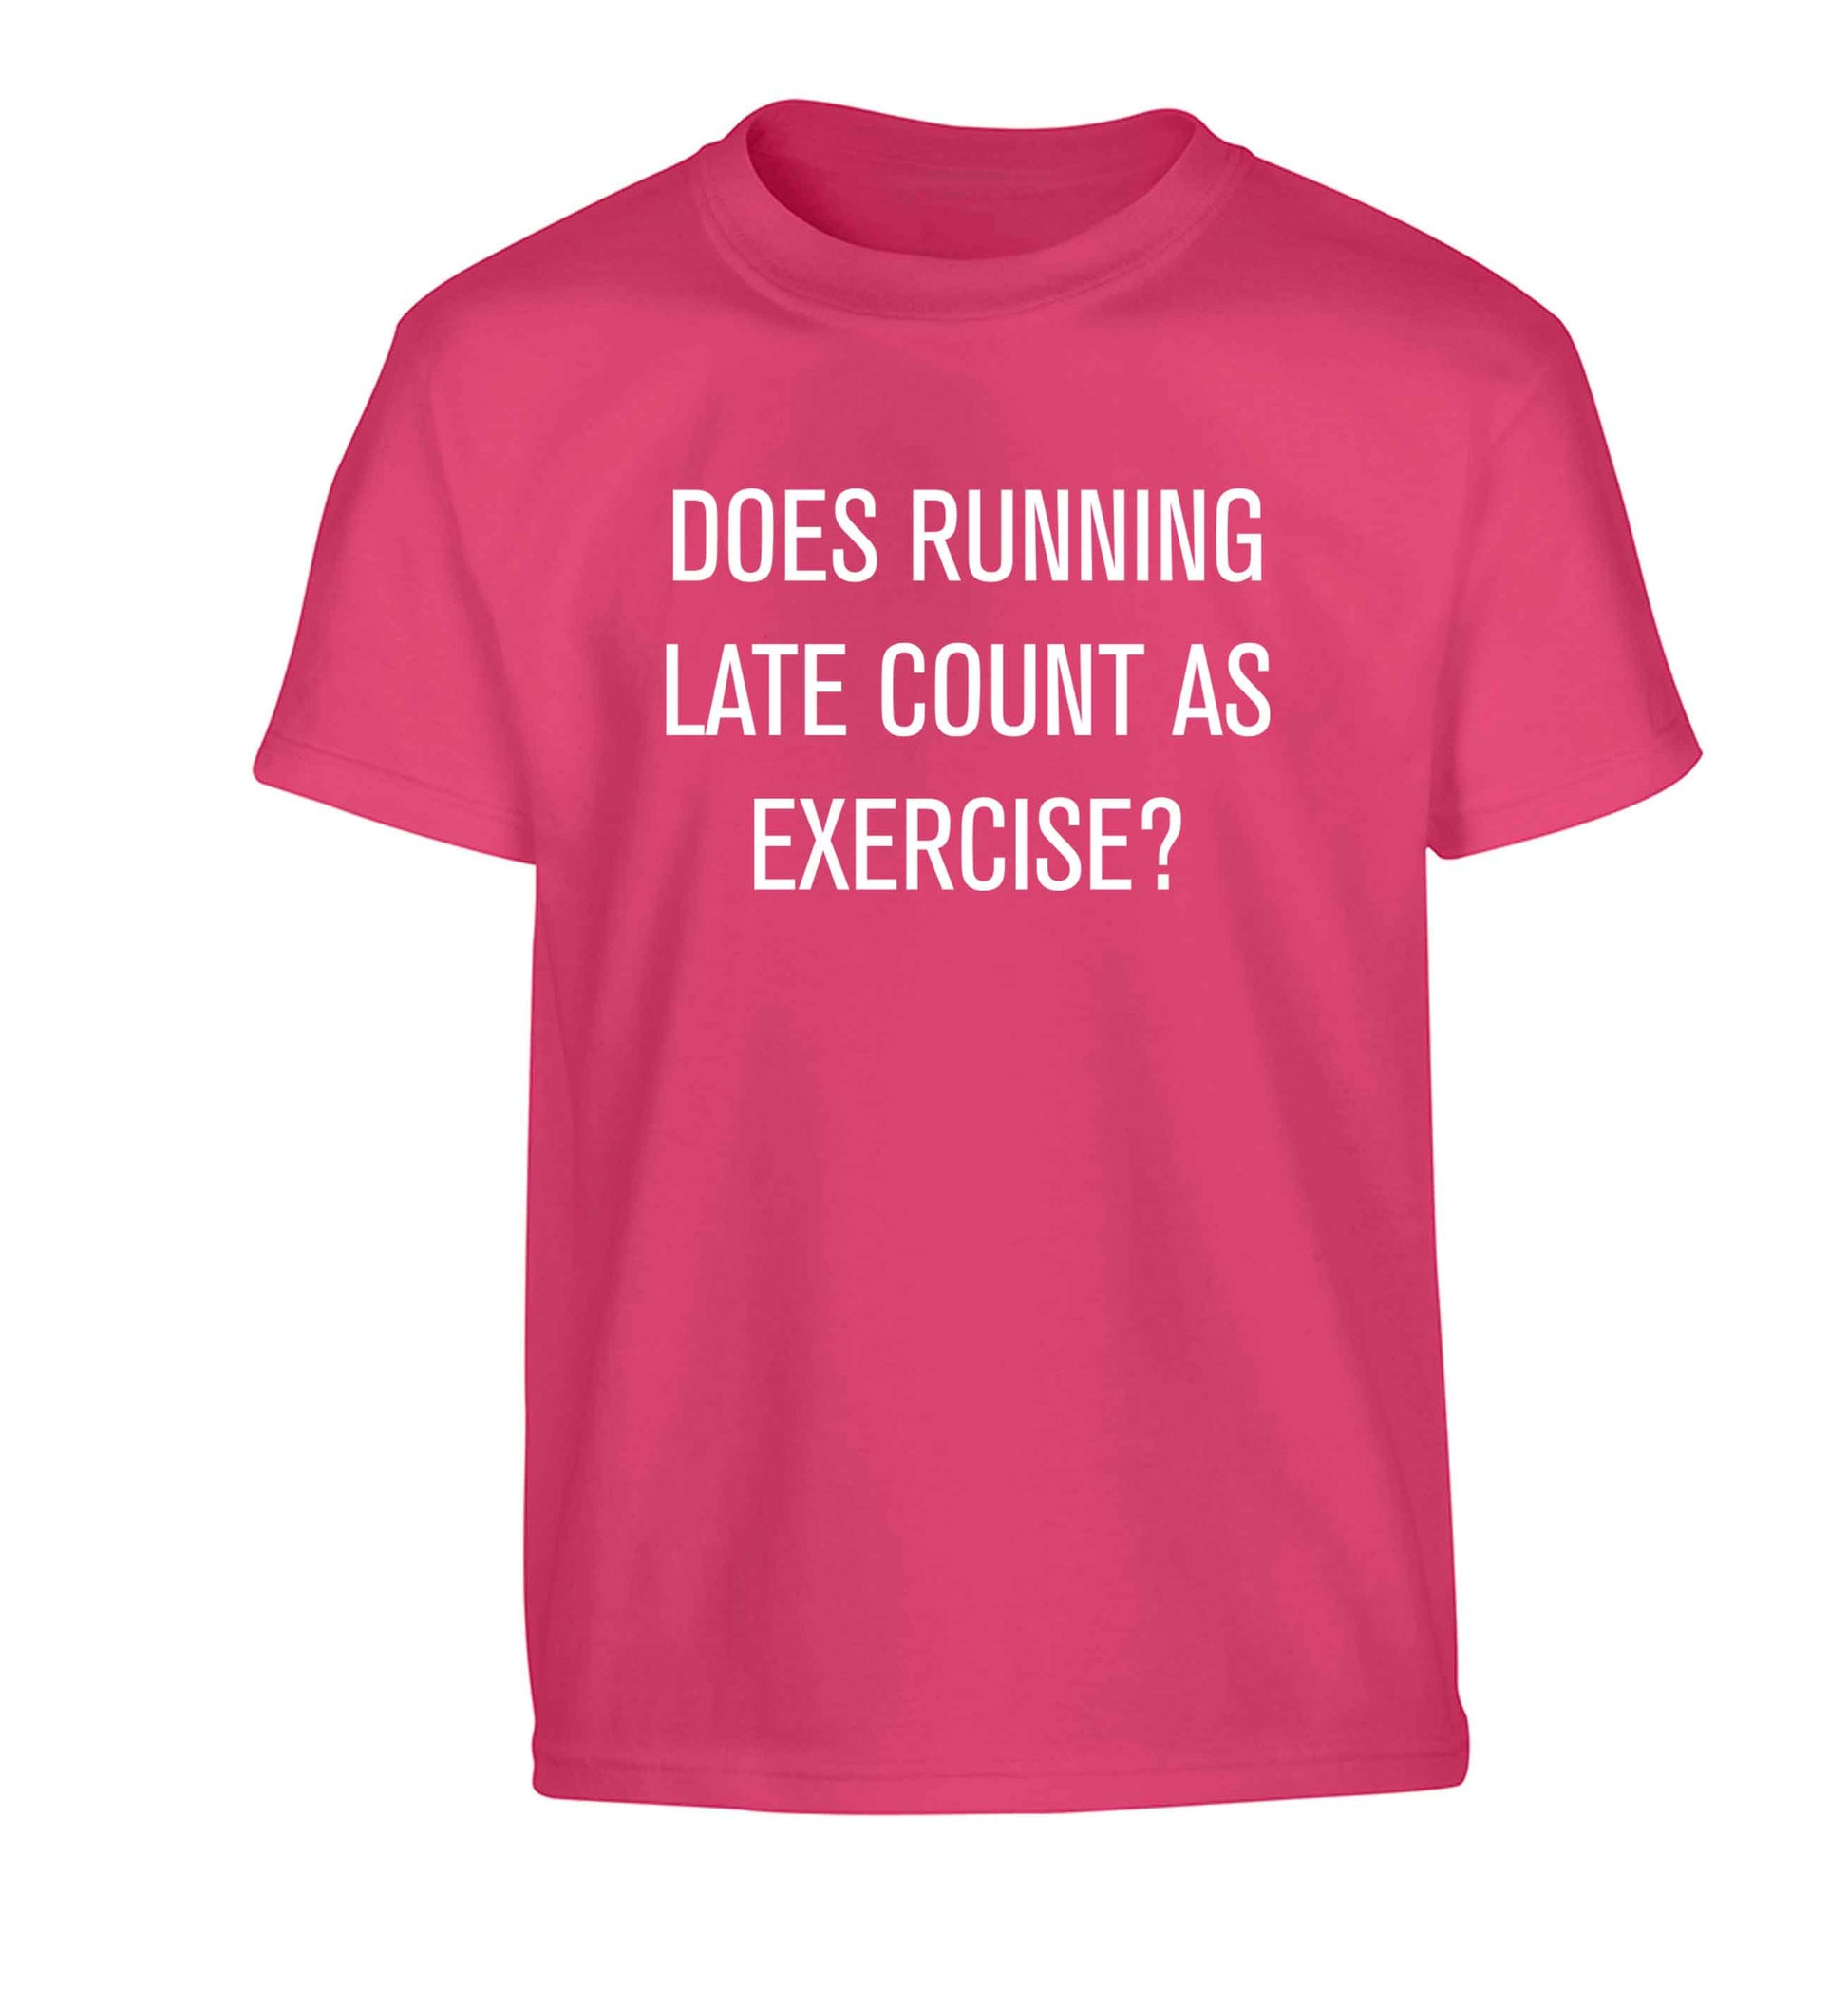 Does running late count as exercise? Children's pink Tshirt 12-13 Years